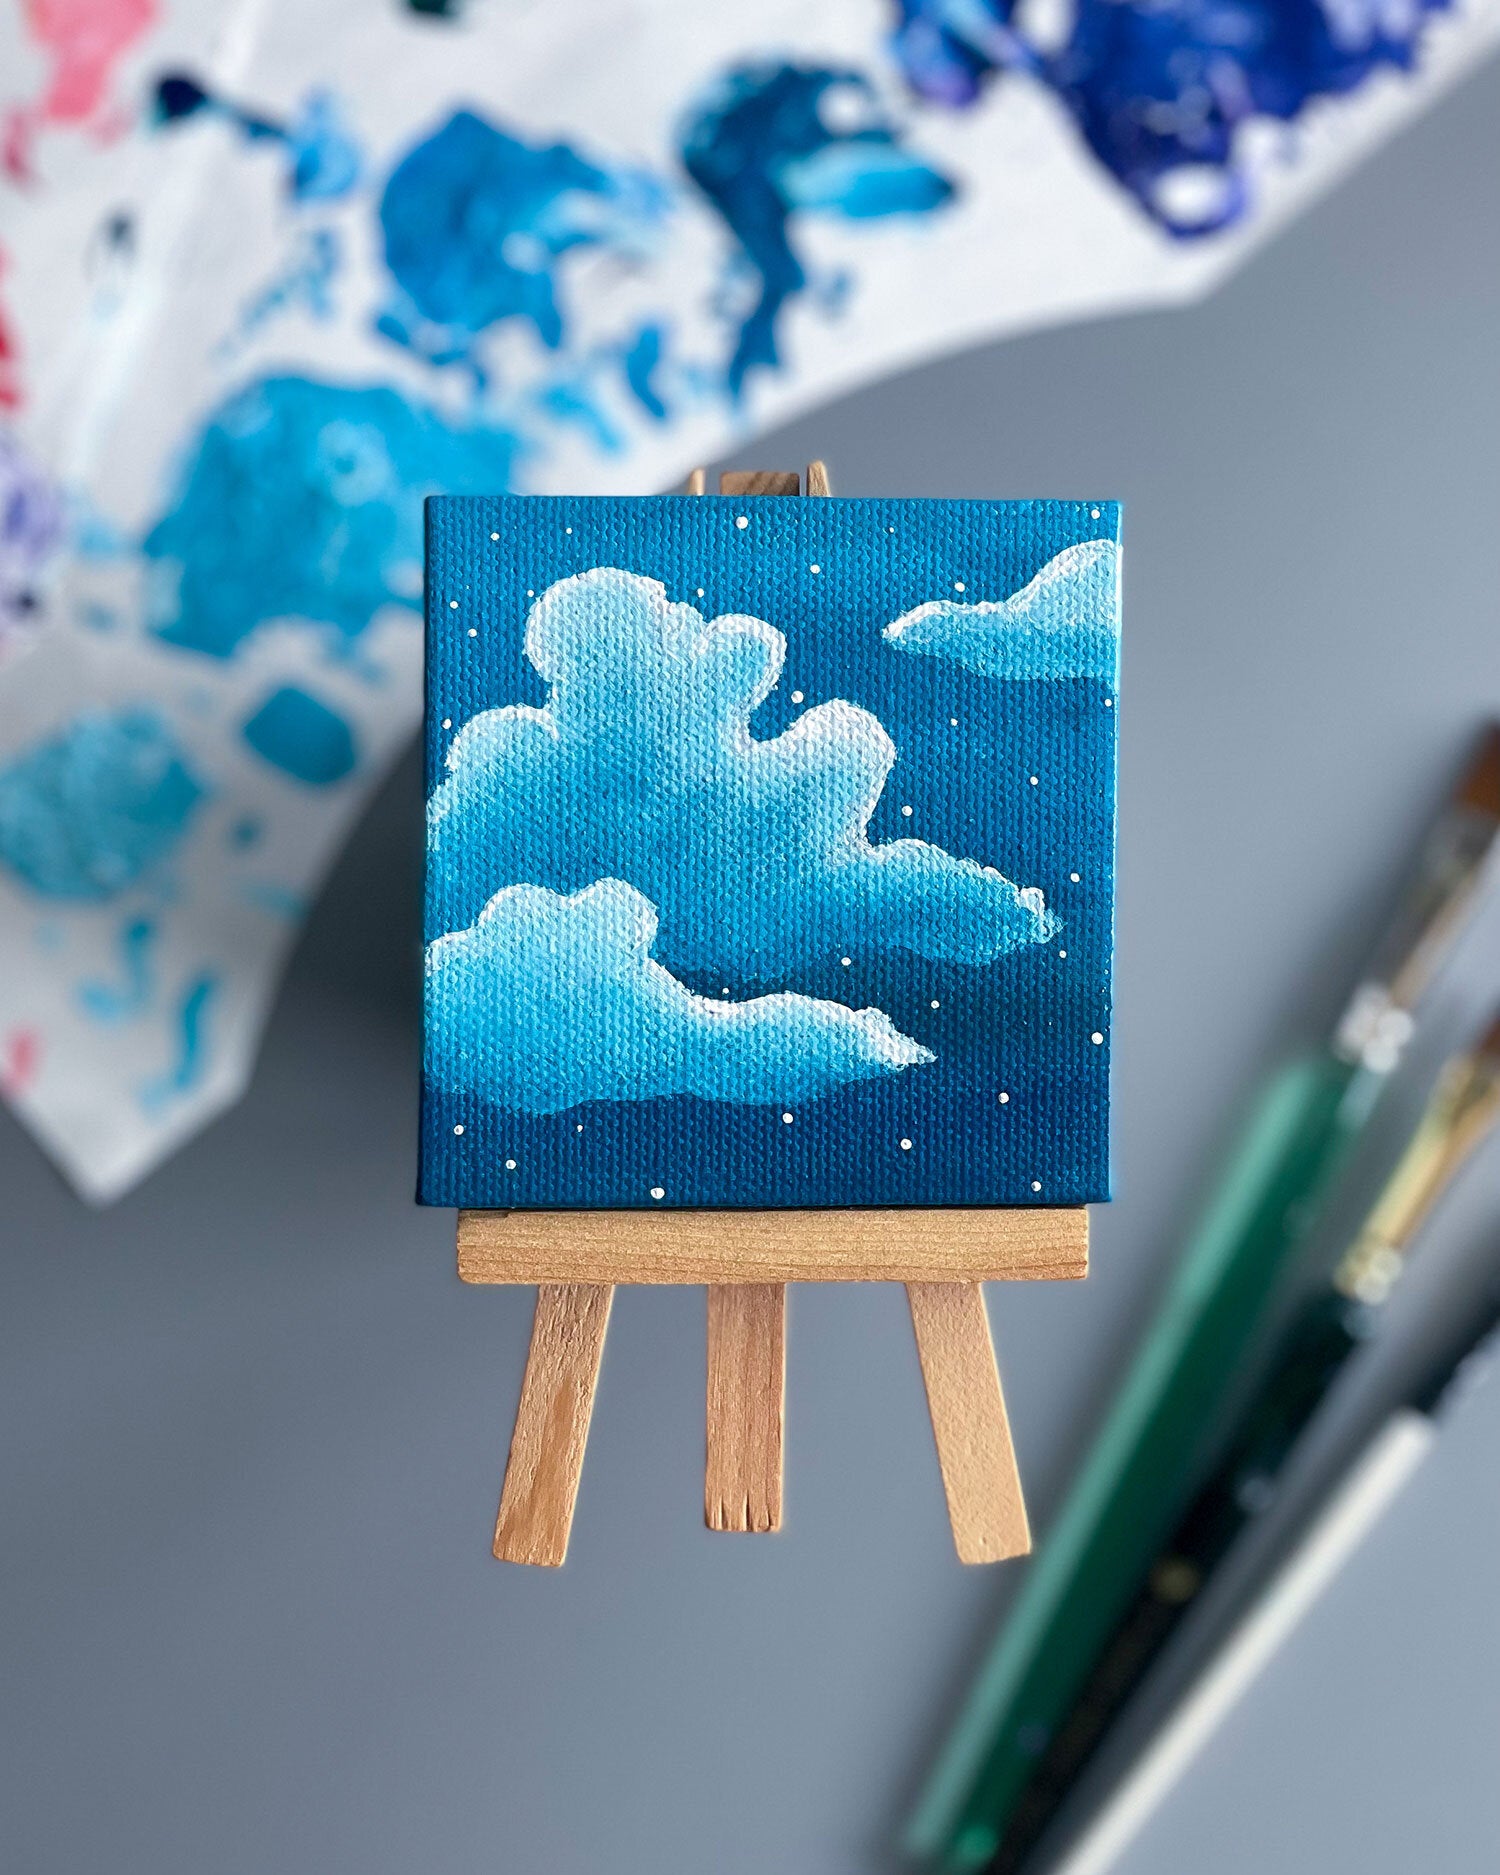 Easel Painting Mini Canvas, Easel Painting Small